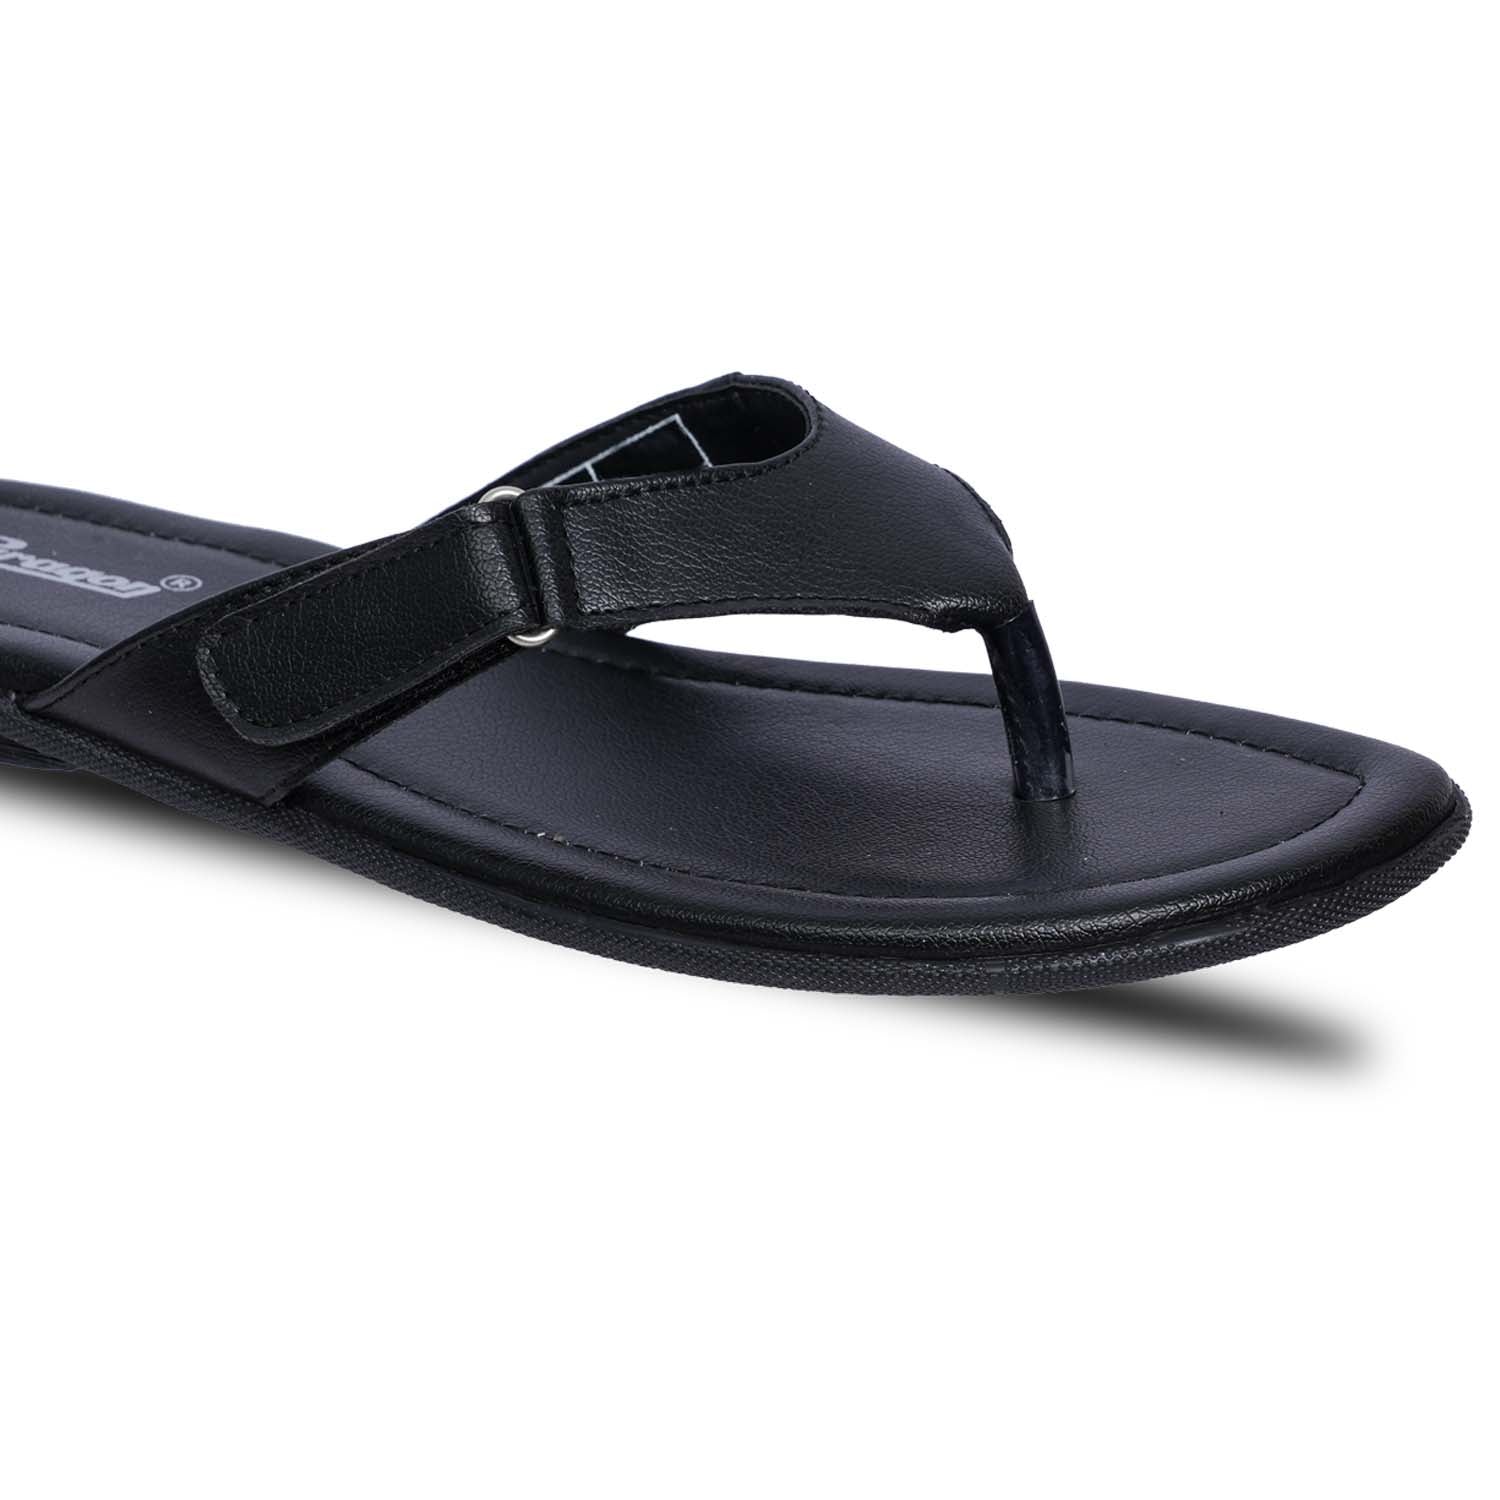 Paragon R4006G Men Stylish Sandals | Comfortable Sandals for Daily Outdoor Use | Casual Formal Sandals with Cushioned Soles